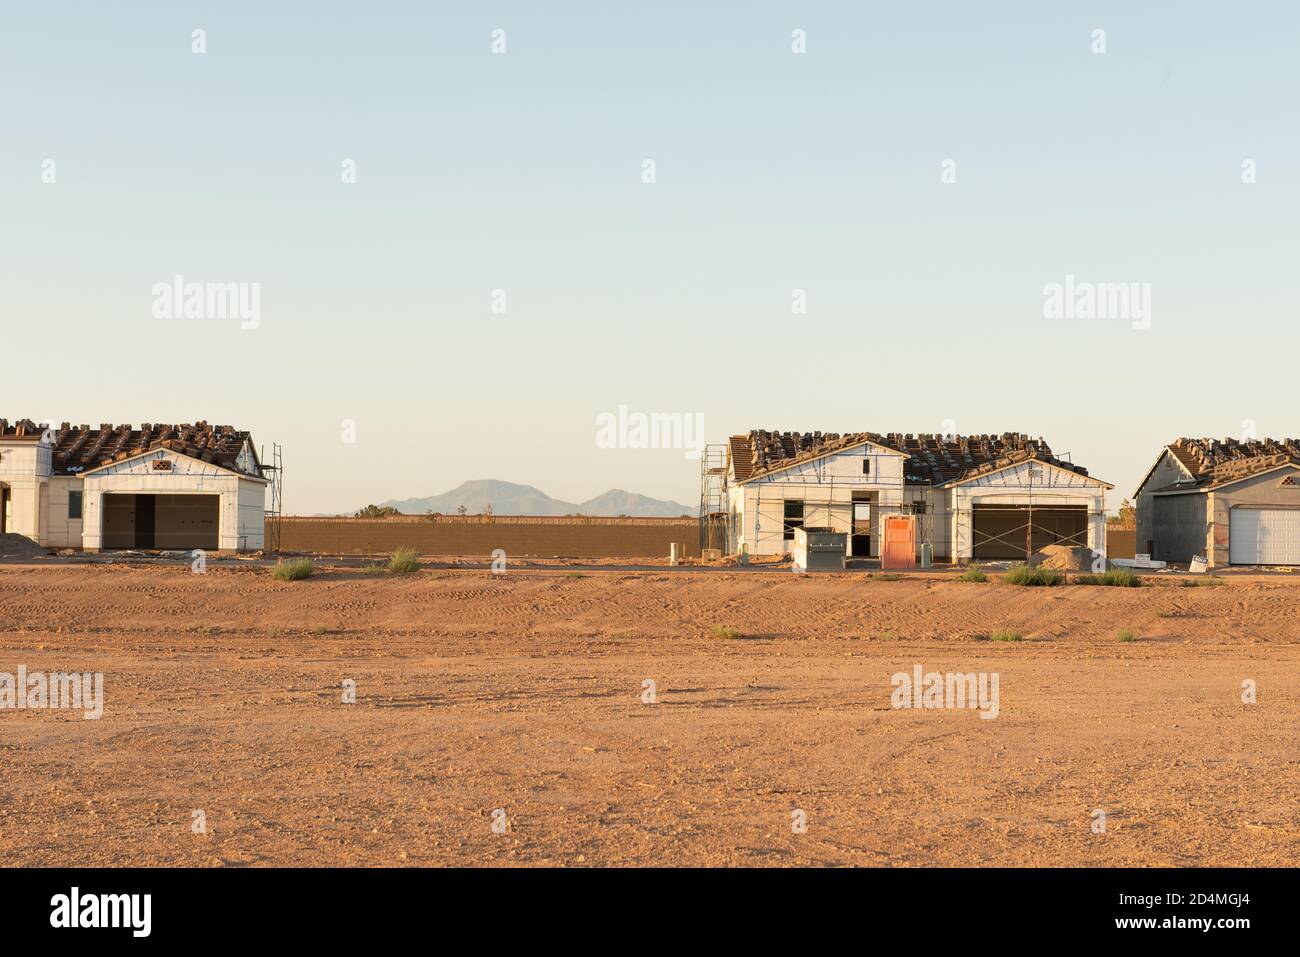 A row of houses being constructed on a dirt lot with an empty lot between and view of the mountains in background stands in central Arizona building boom. Stock Photo